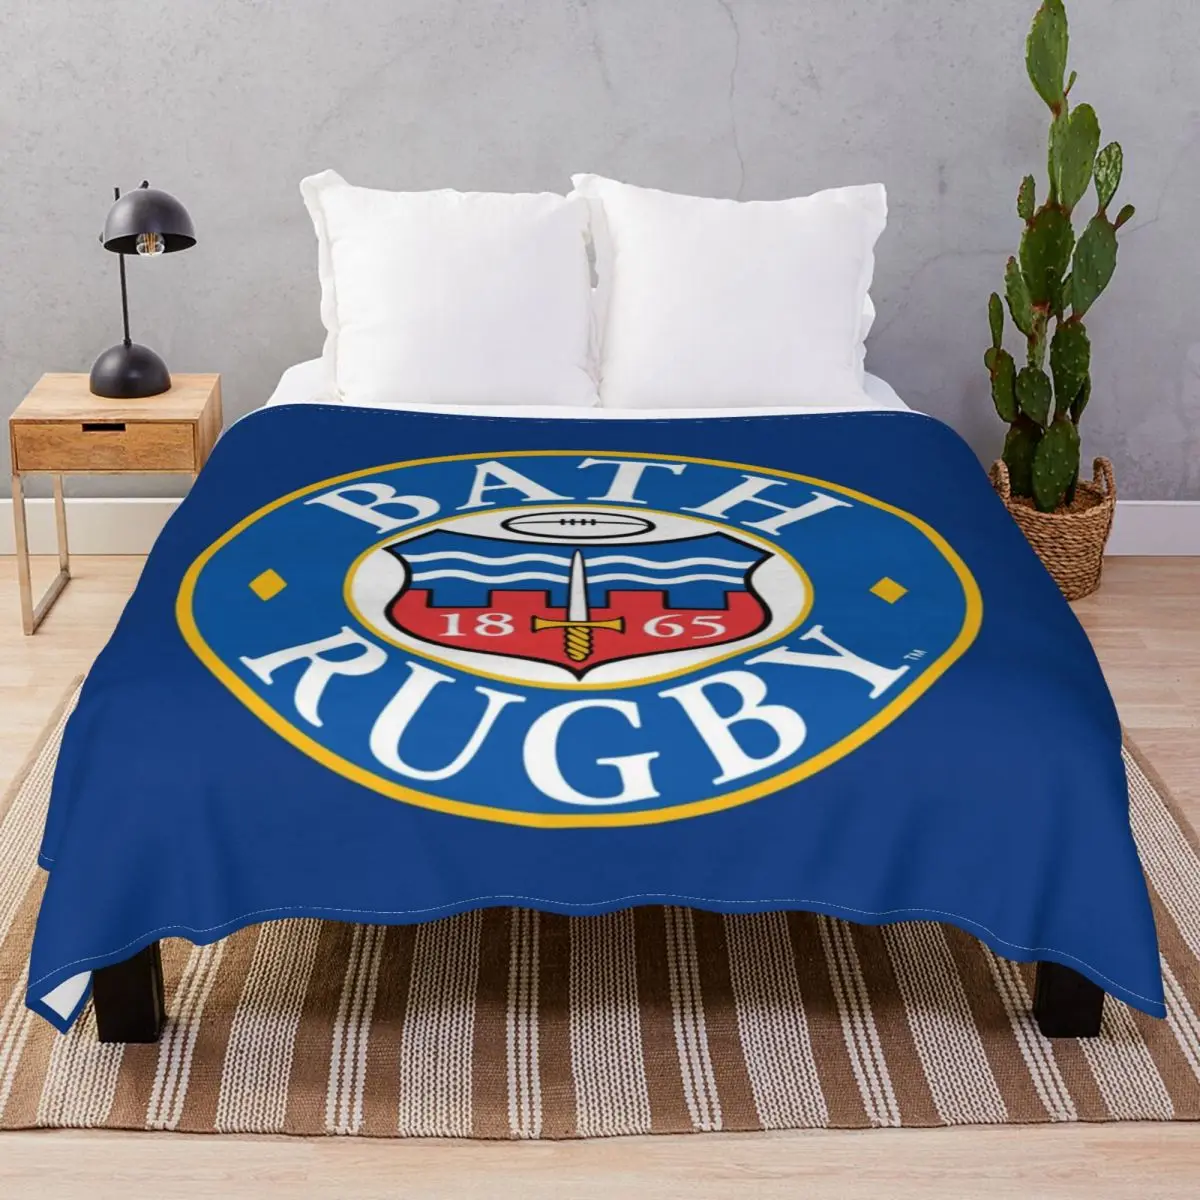 Bath Rugby Blankets Fleece Printed Multi-function Throw Blanket for Bed Sofa Camp Office